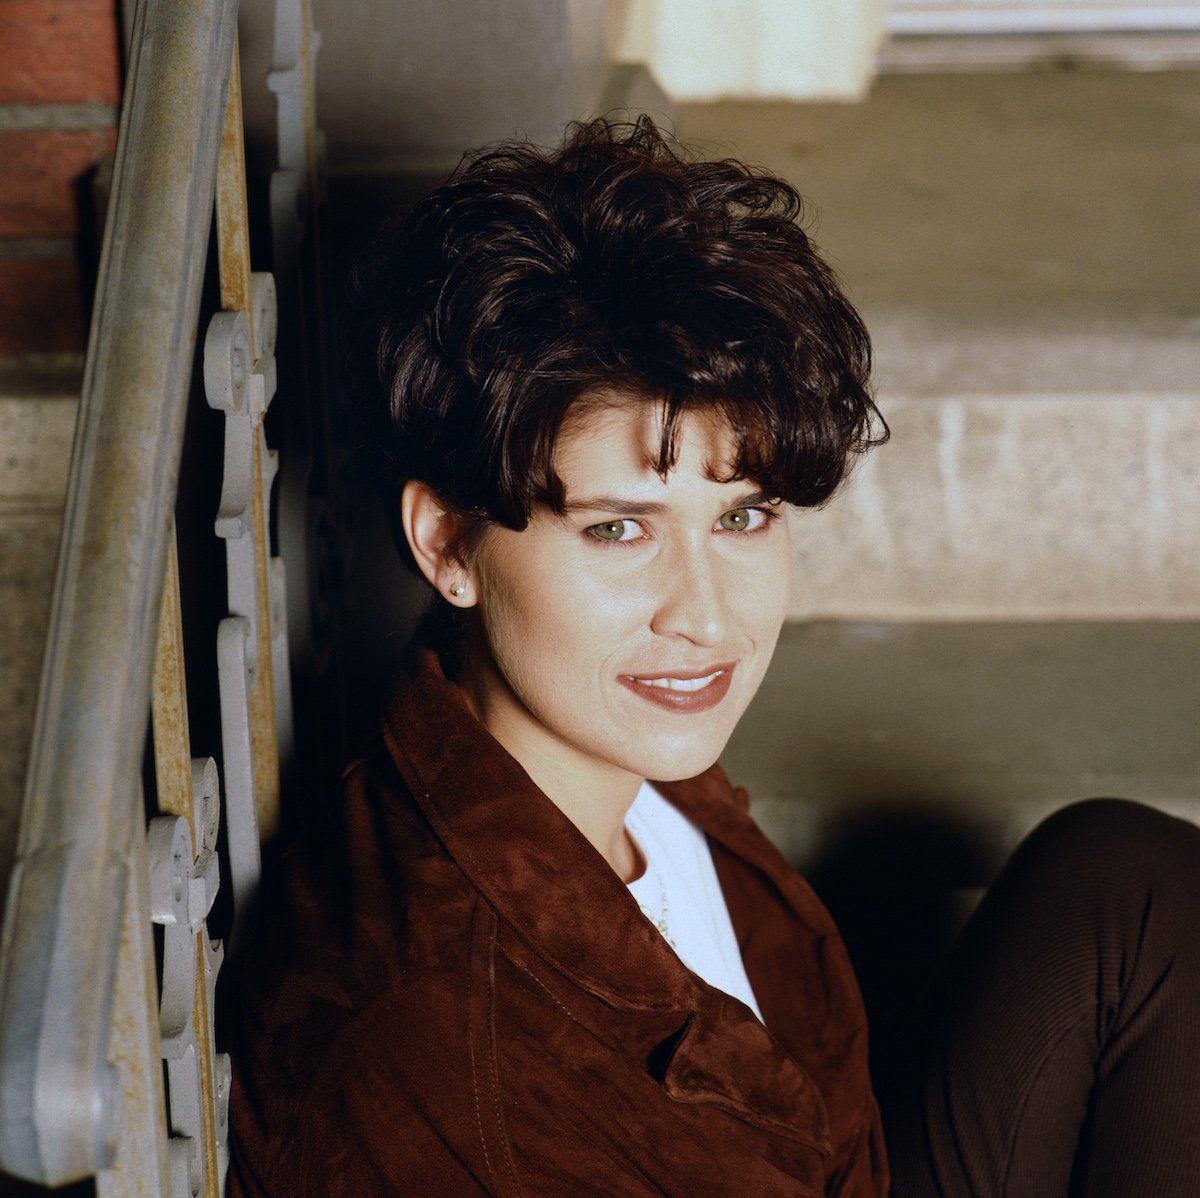 Actor Nancy McKeon as Annie O'Donnell in the CBS sitcom 'Can't Hurry Love' in 1995